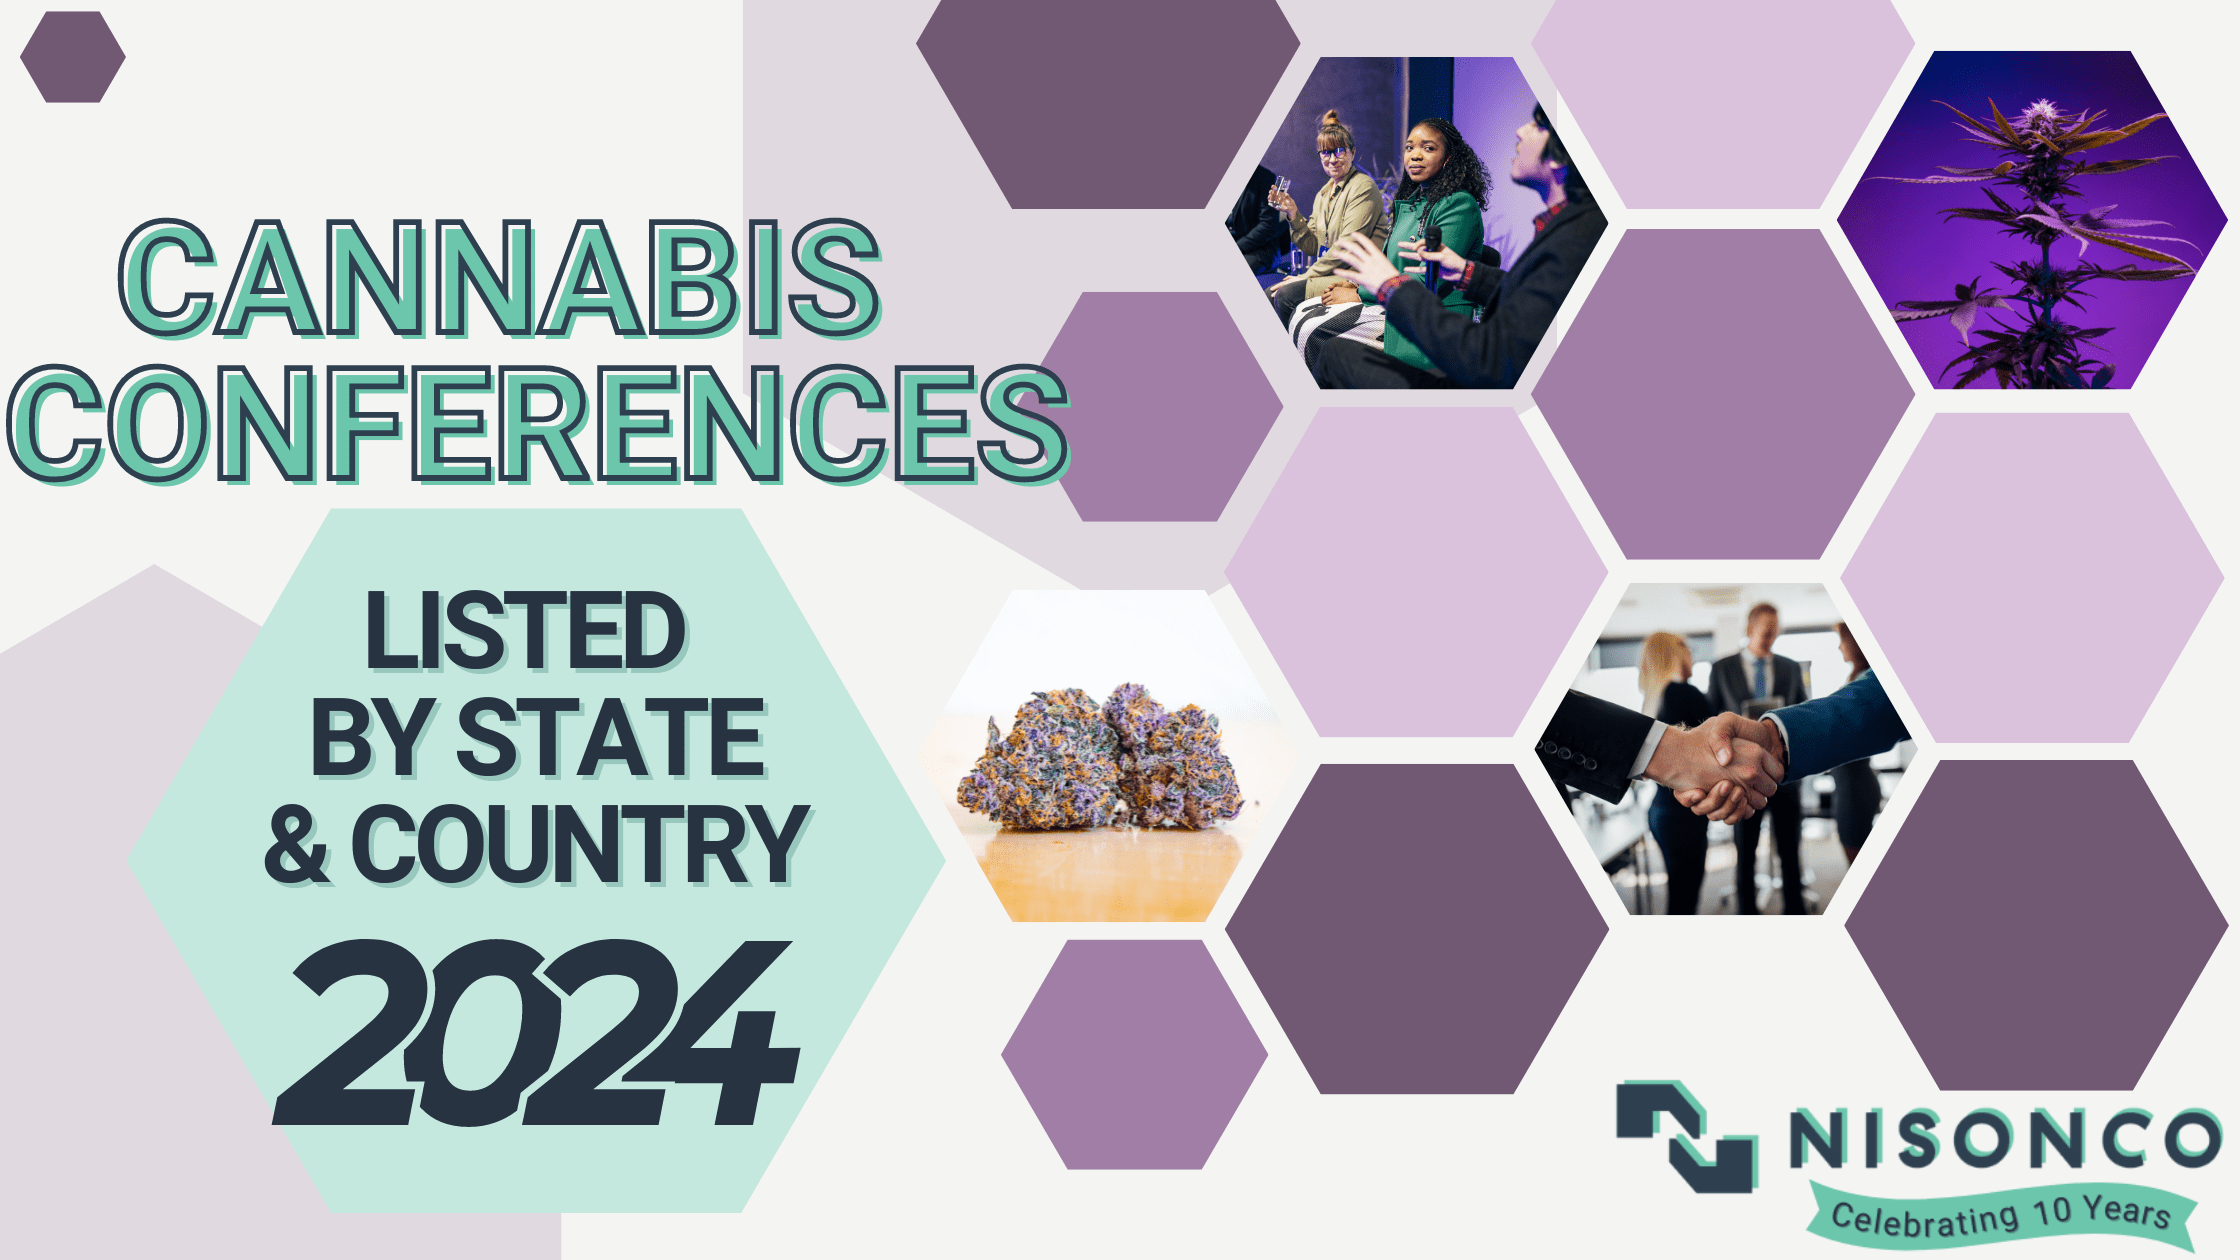 The text 'Cannabis Conferences Listed By State & Country 2024' is to the left of expo and trade show imagery including cannabis plants, speakers and attendees.